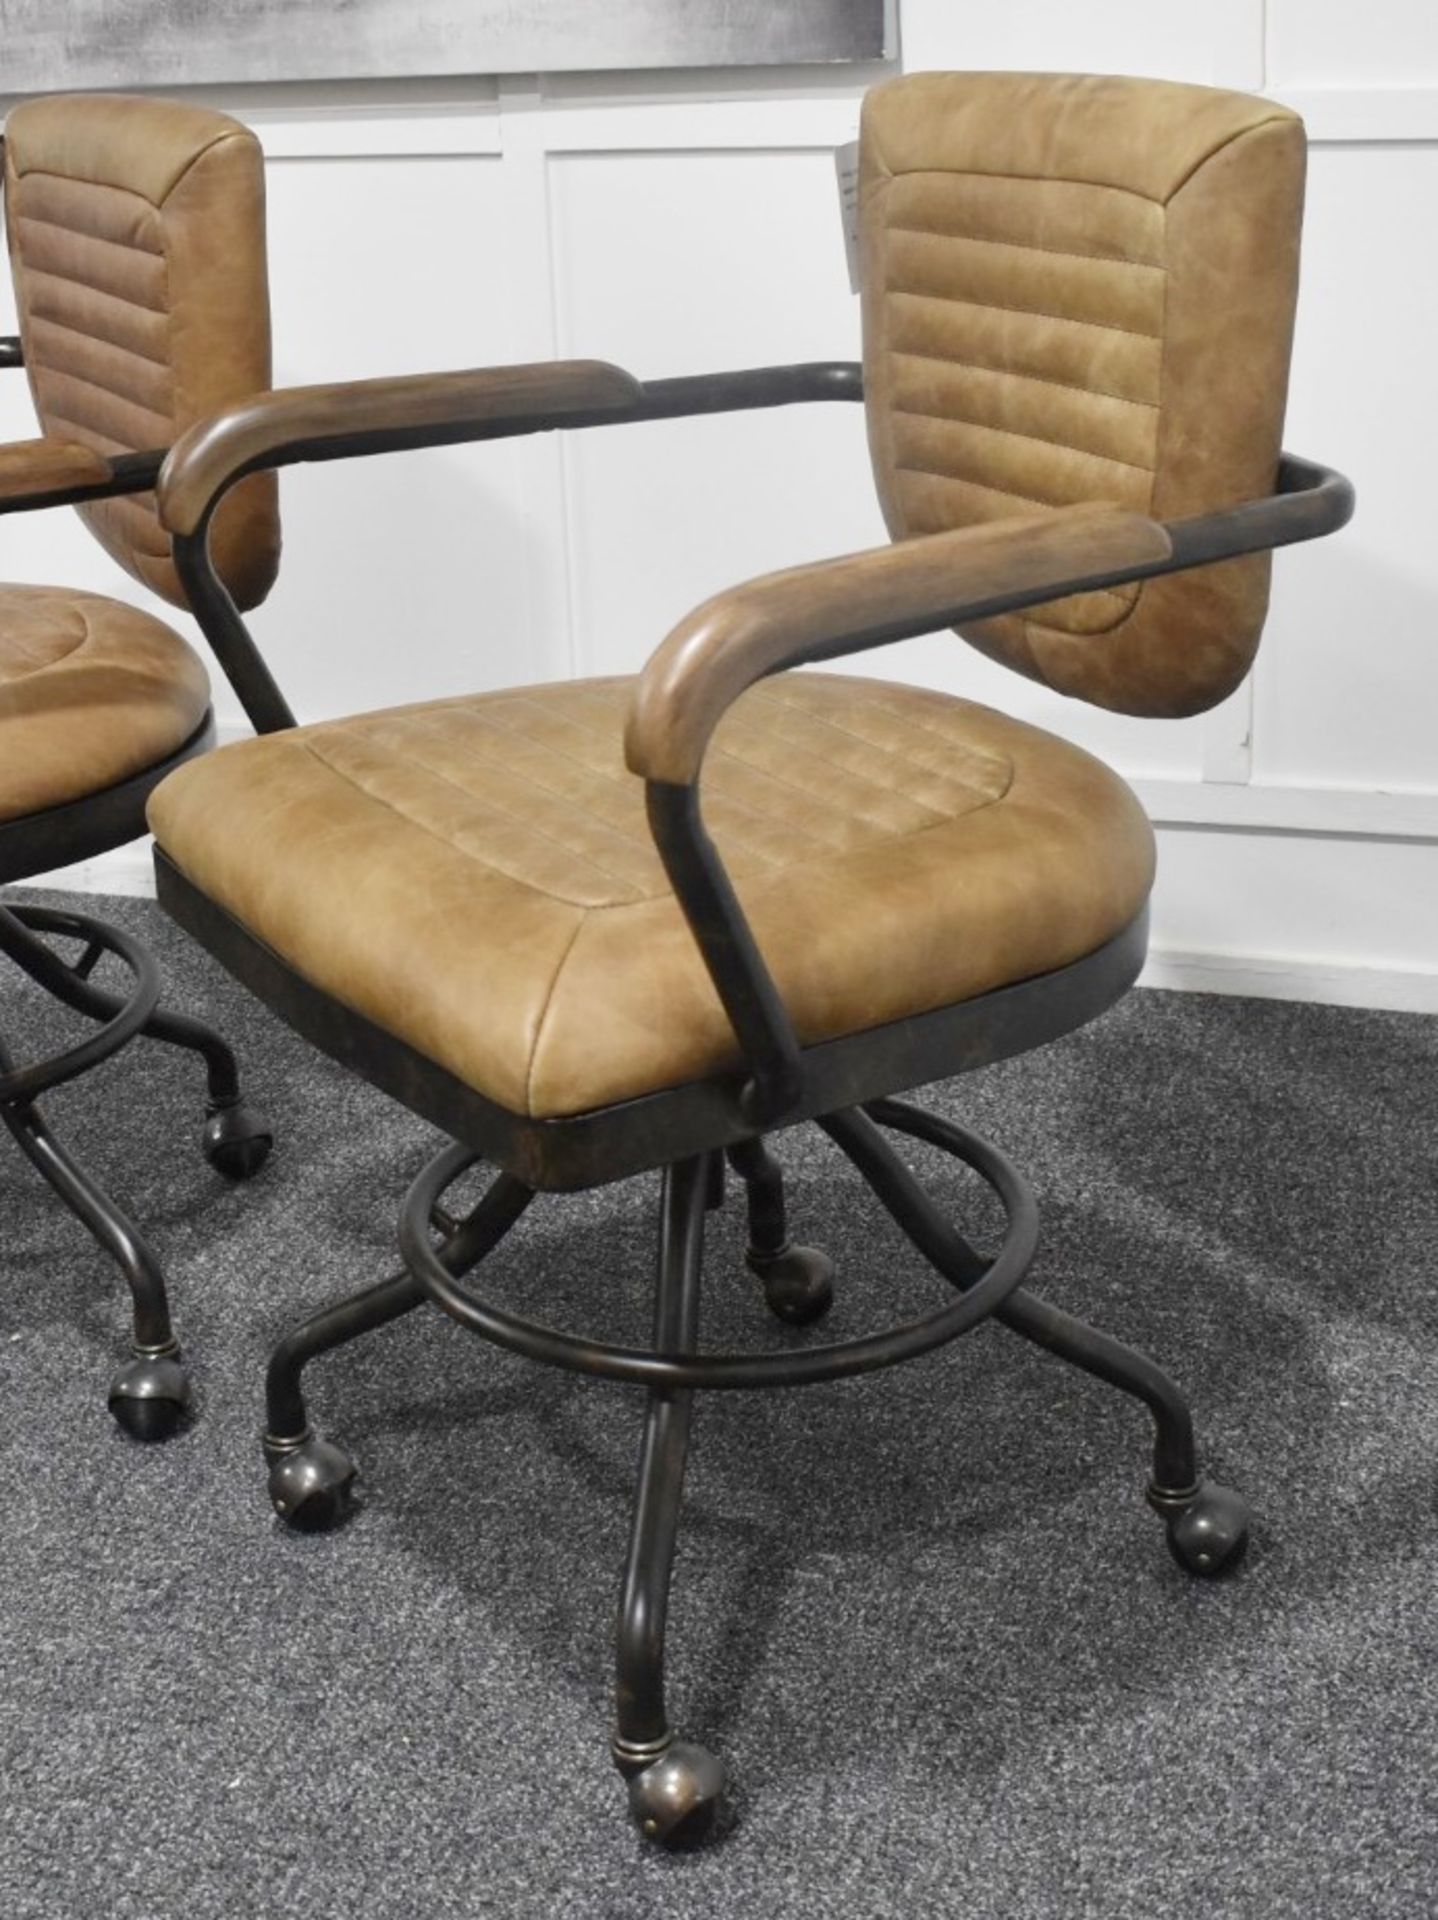 1 x Industrial-style Genuine Leather Upholstered Swivel Desk Chair - Original RRP £629.00 - Recently - Image 5 of 9